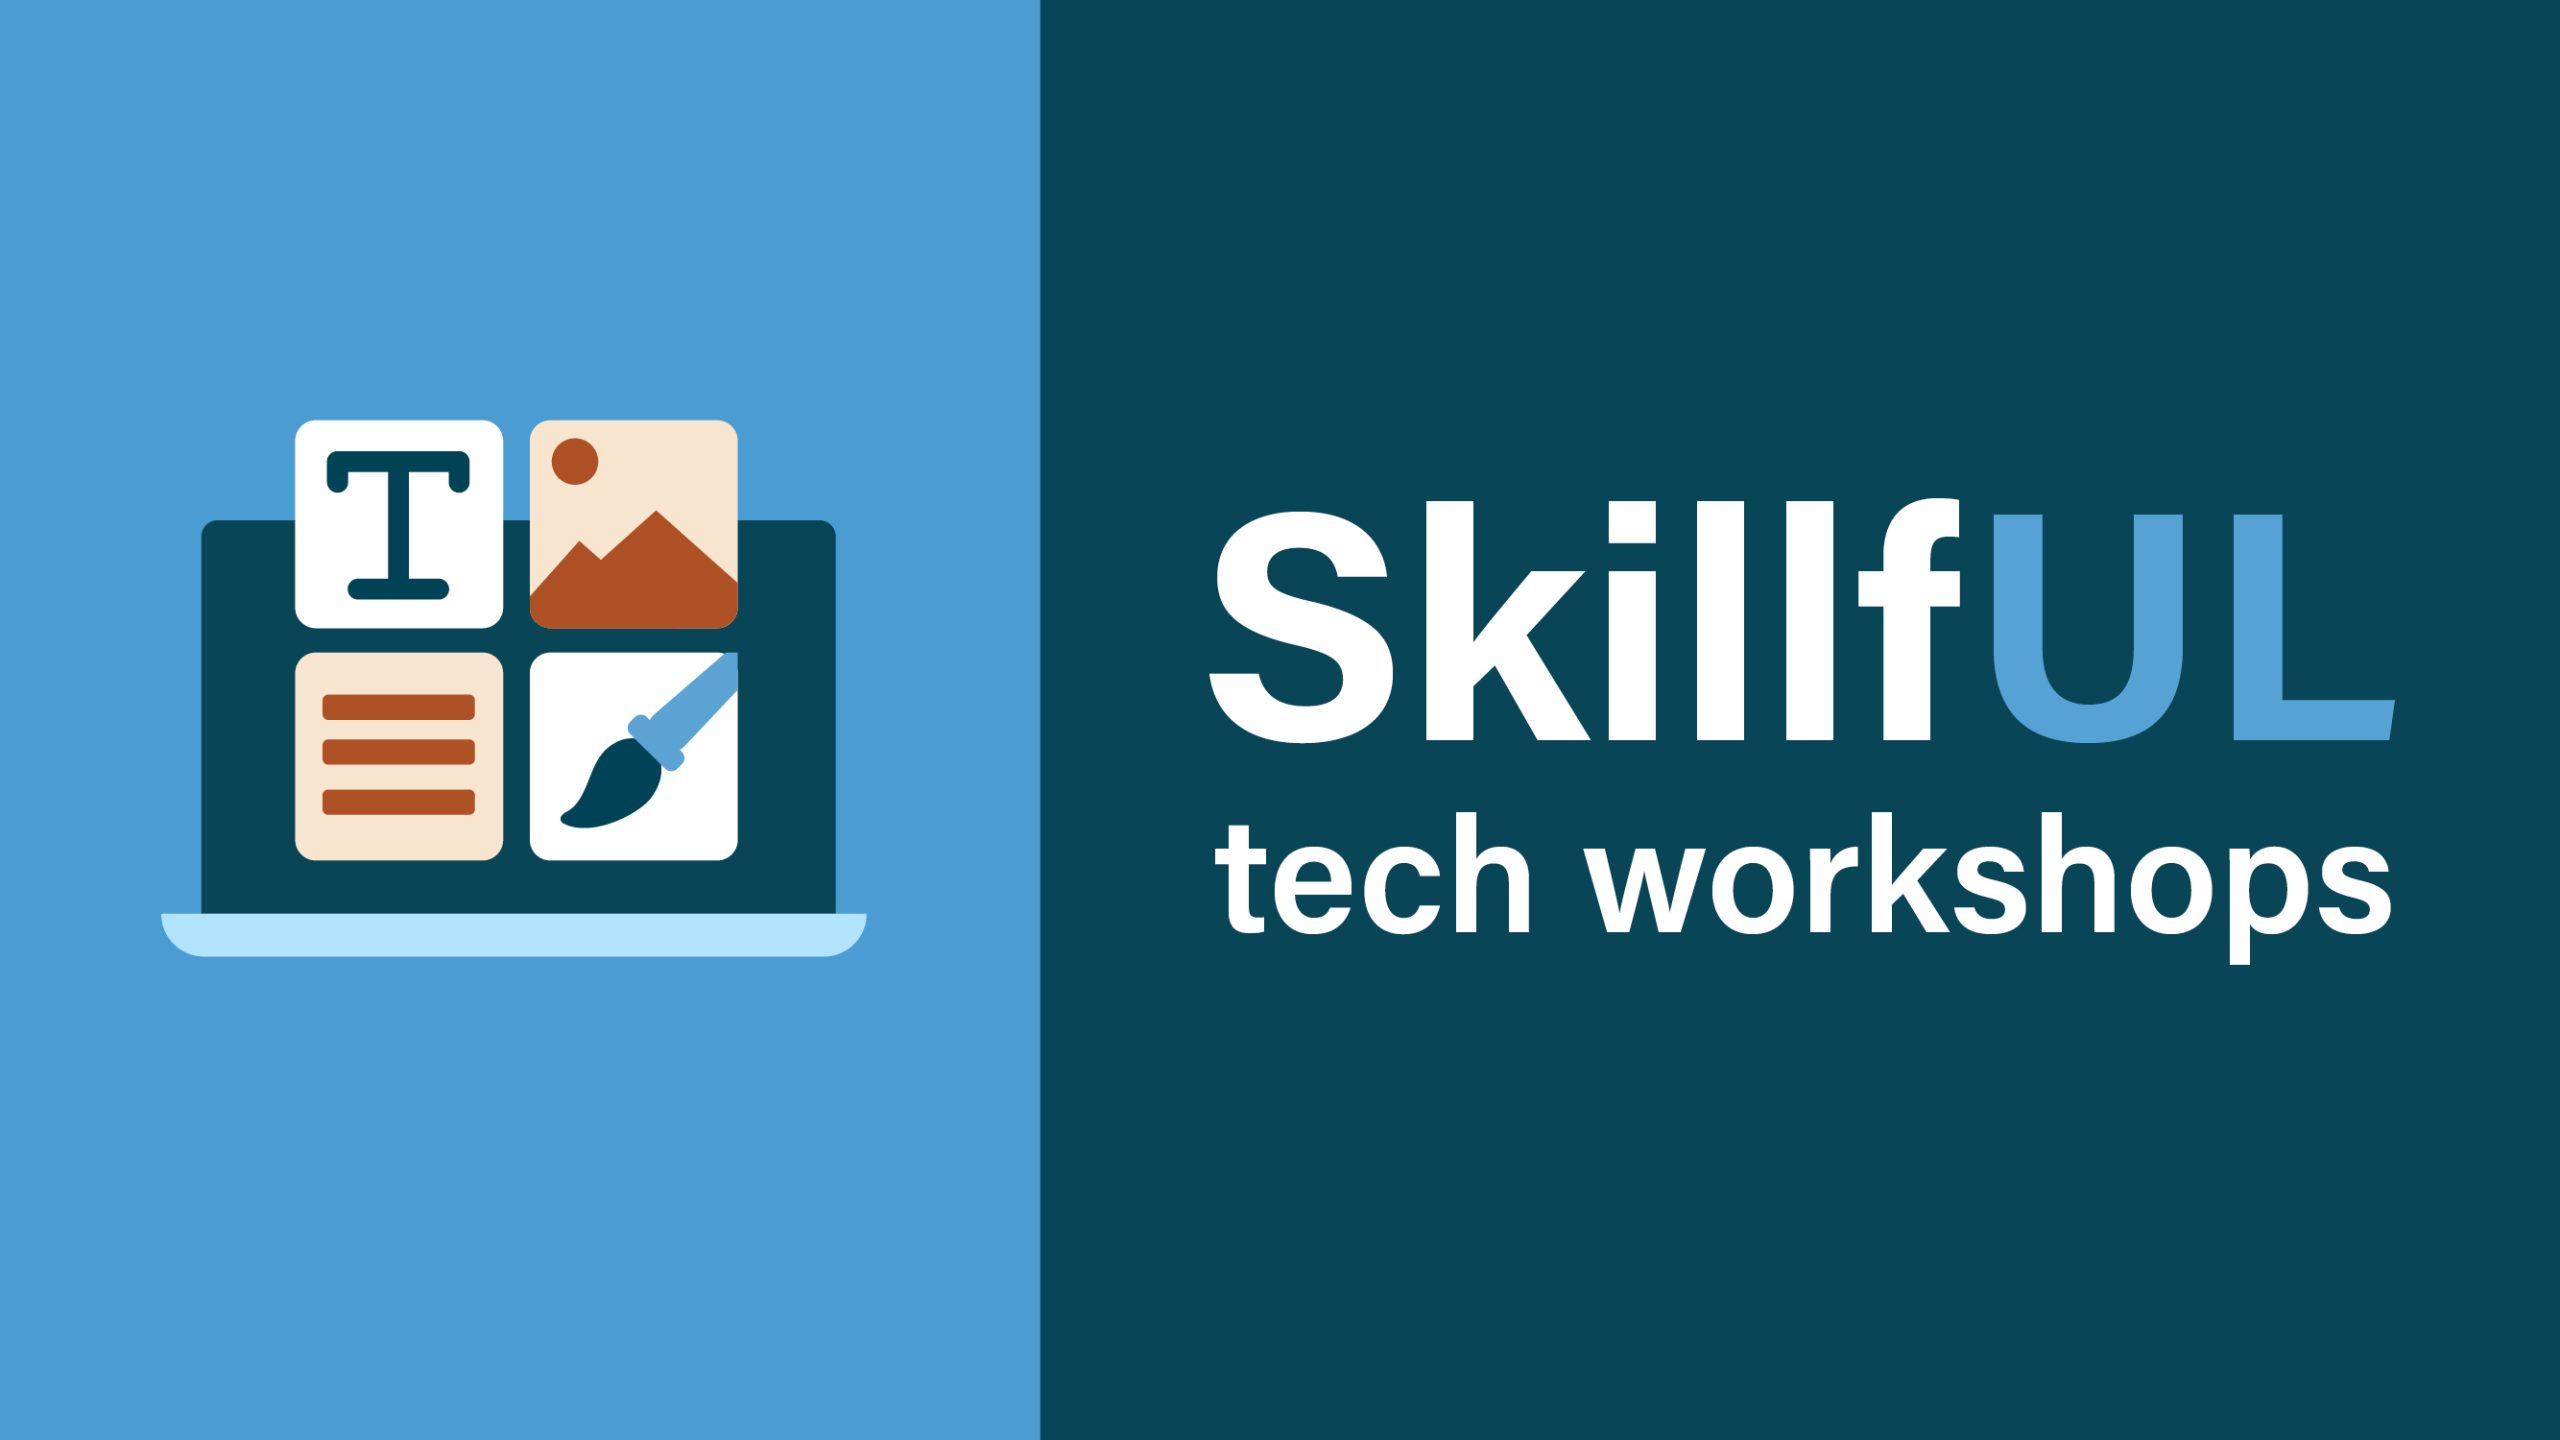 Build your knowledge with SkillfUL Tech workshops